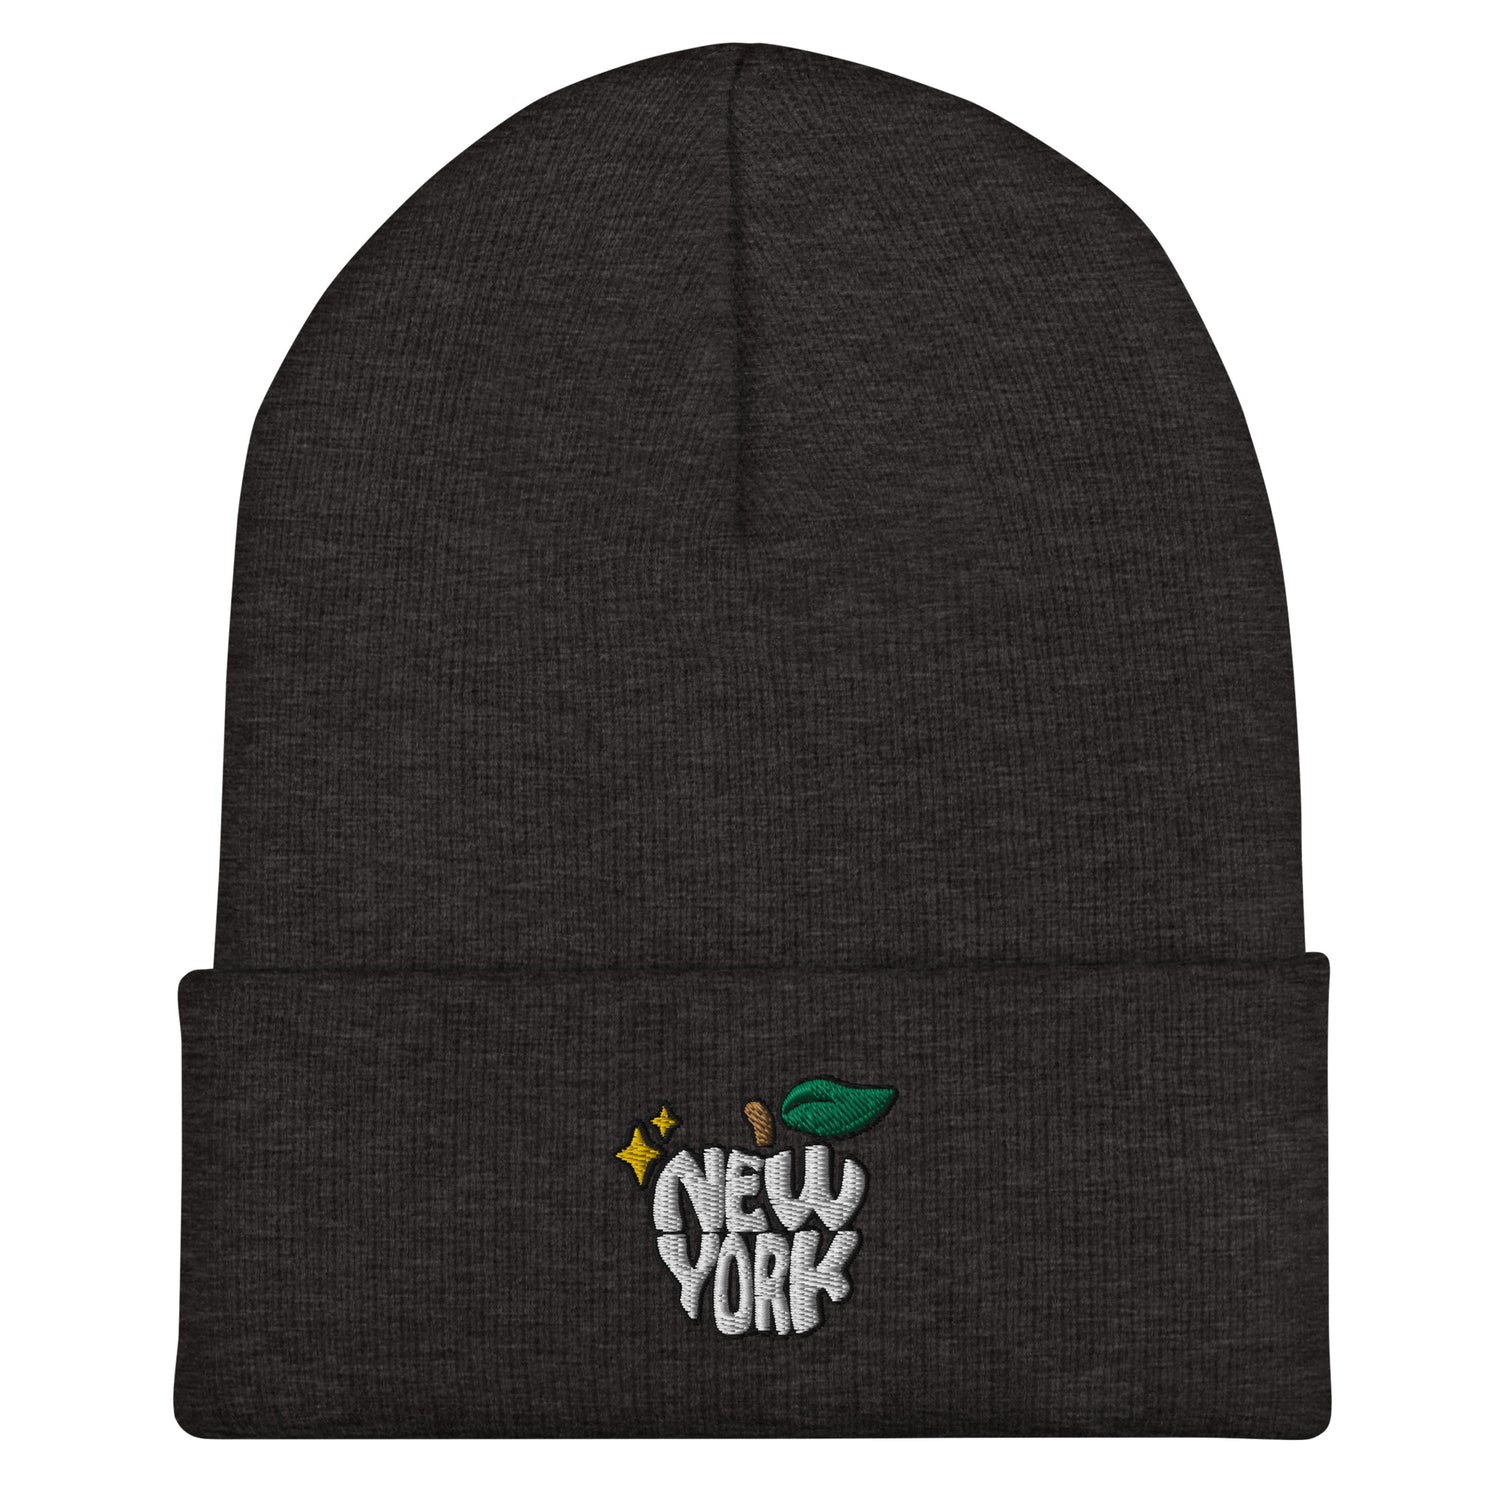 New York Apple Logo Embroidered Charcoal Grey Cuffed Beanie Hat Scattered Streetwear